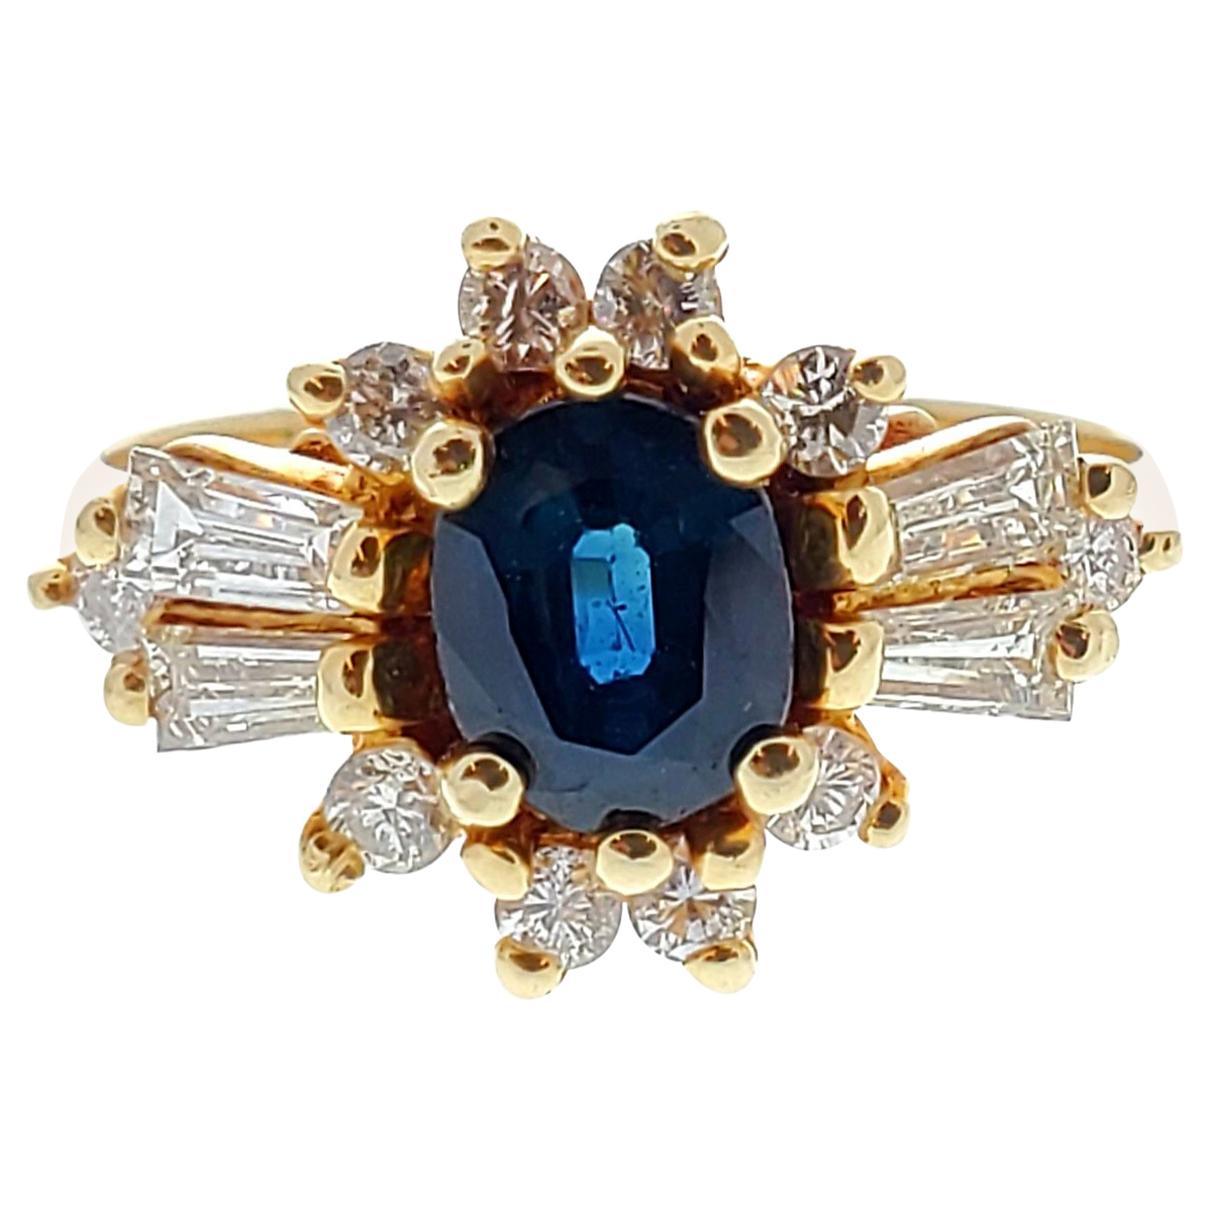 1.00 Carat Oval Sapphire and Diamond Vintage Ring in 14 Karat Yellow Gold